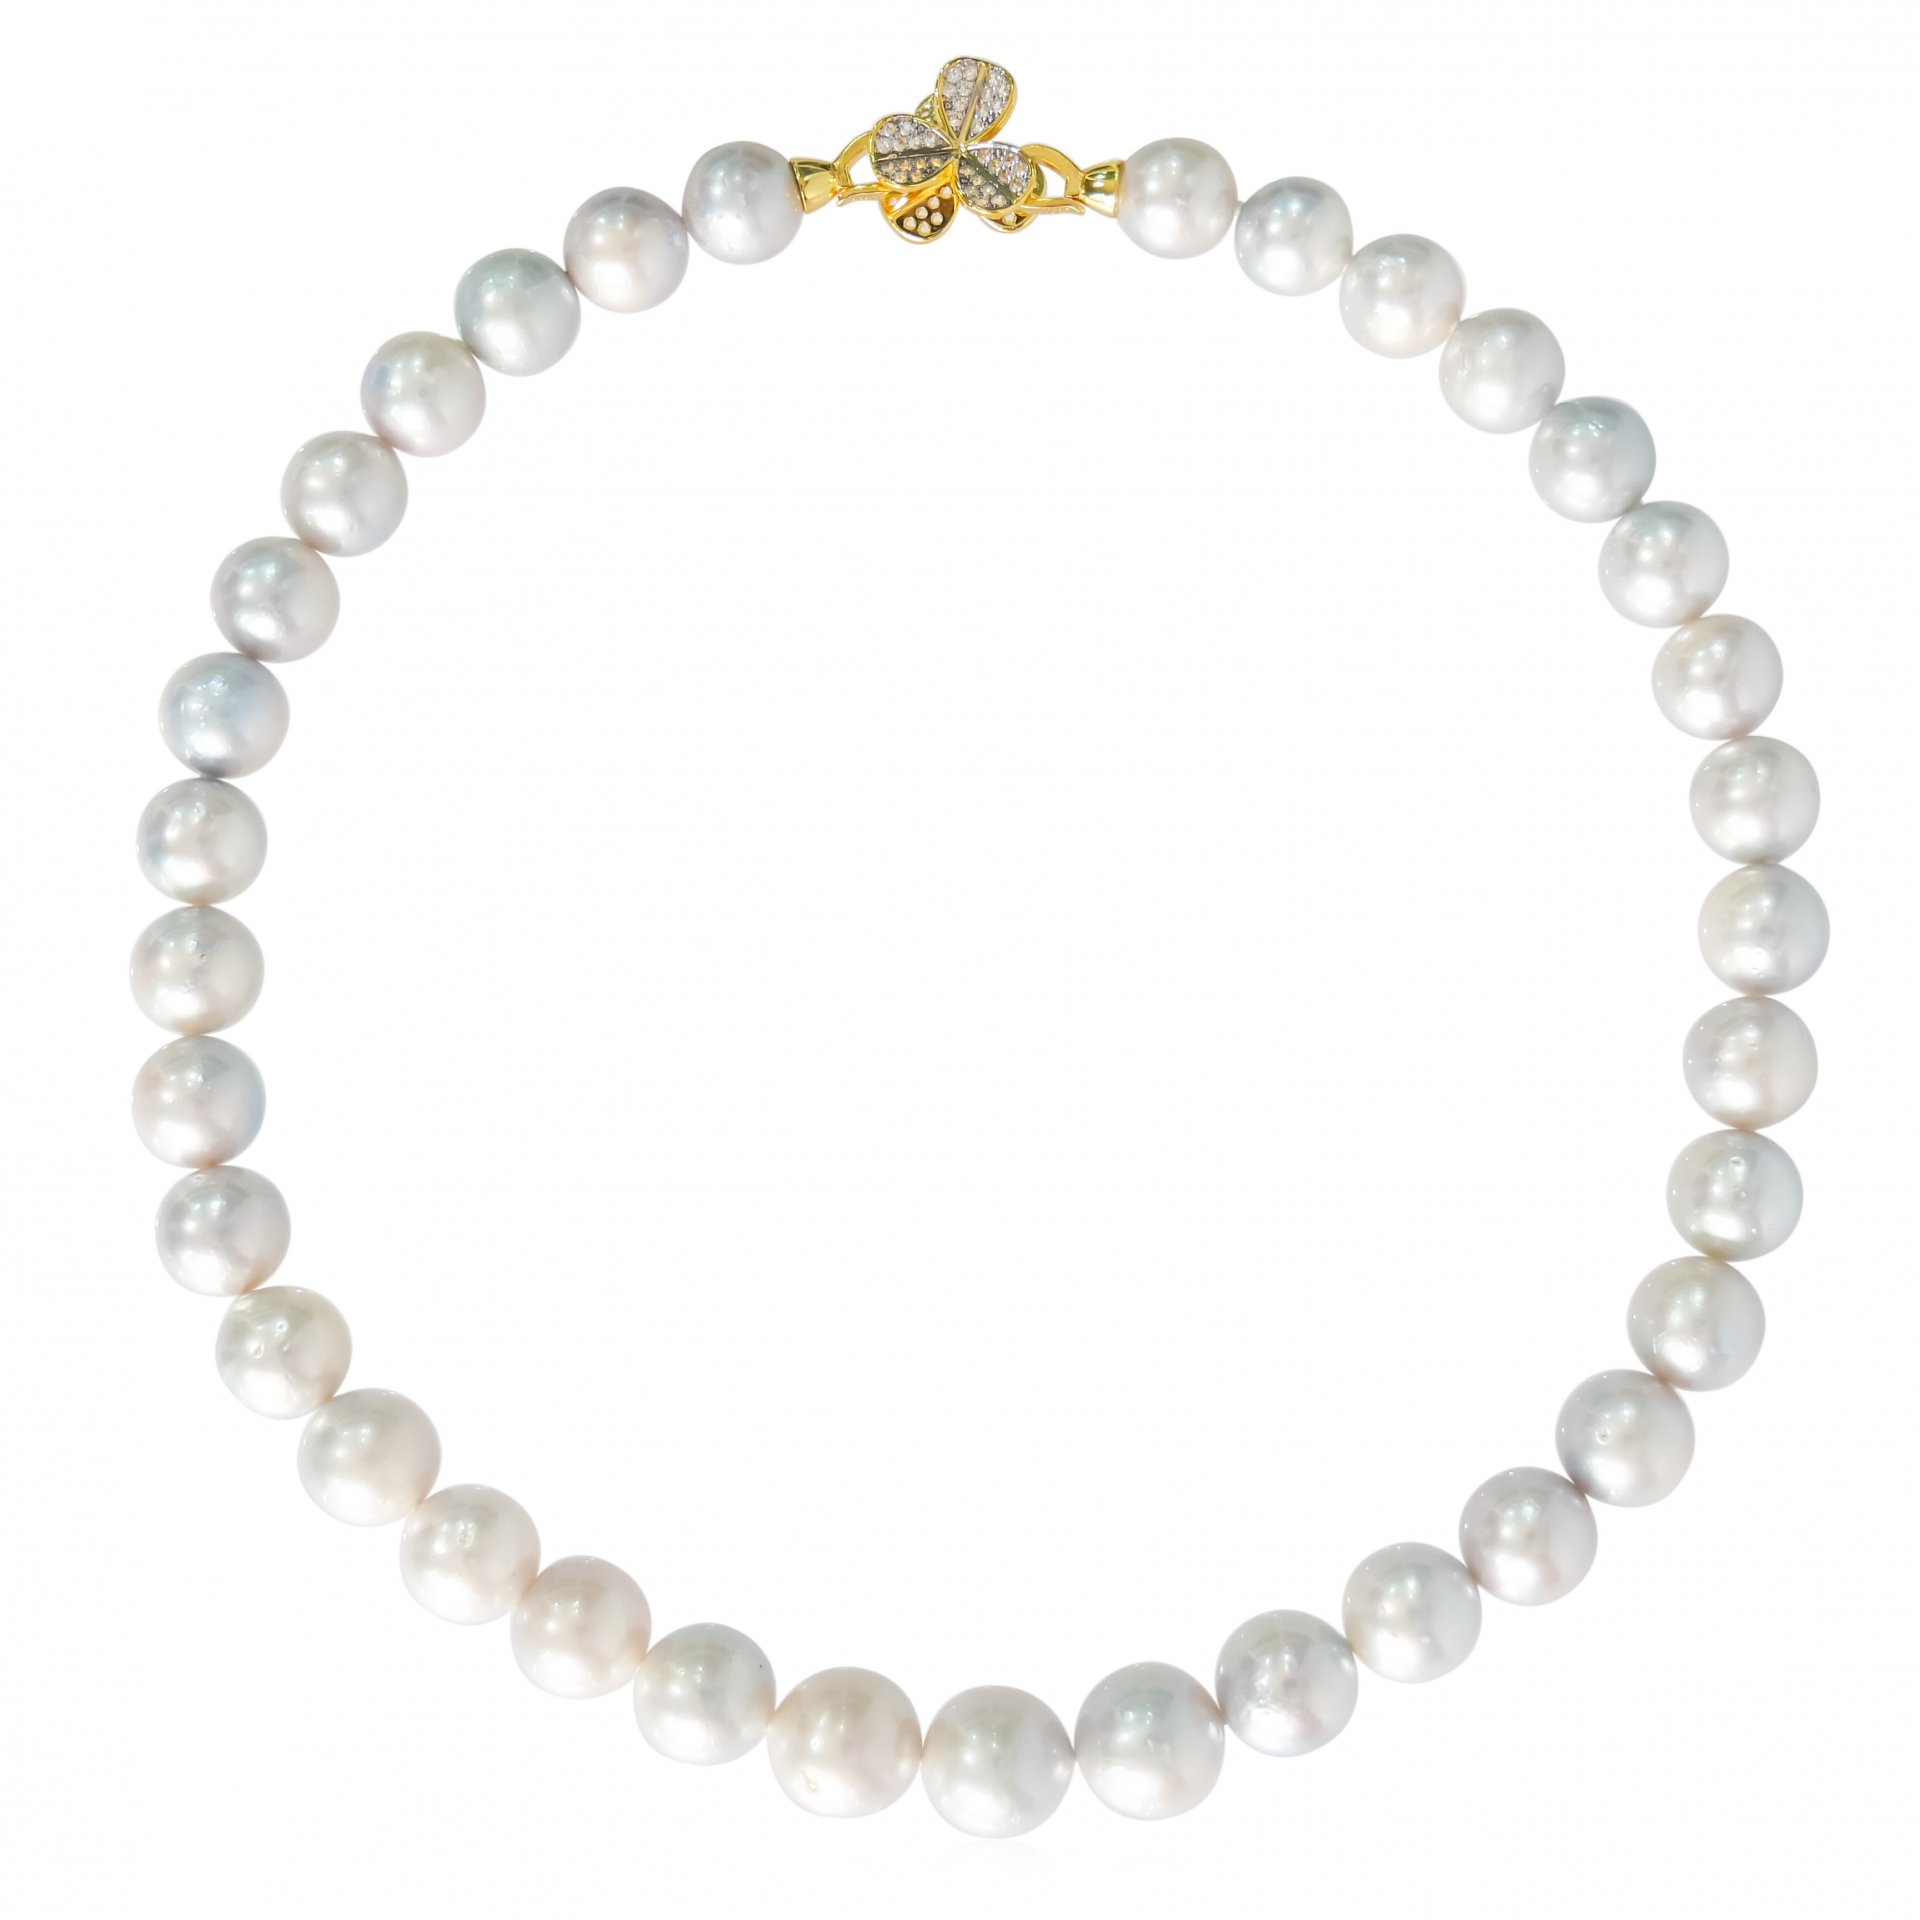 12.0 - 14.0 mm, White South Sea Pearl, Graduated Pearl Necklace